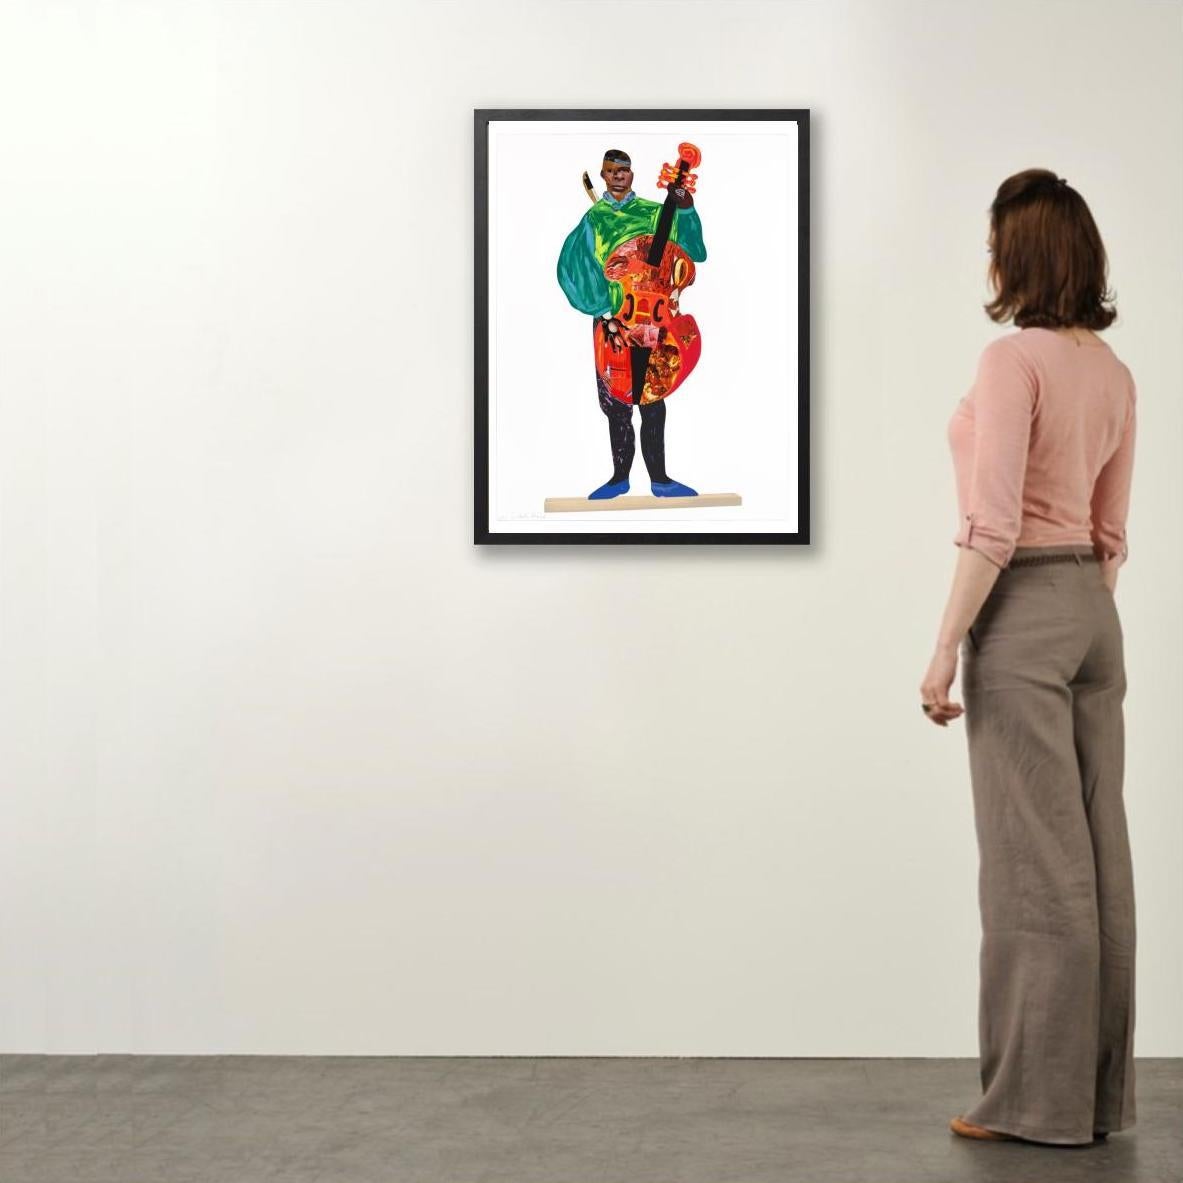 Lubaina Himid
Naming the Money: Kwesi, 2004/2021 - Contemporary art, 21st Century, Colourful

2021
Screenprint
Edition of 125
76 × 60 cm
(29.92 × 23.62 in)
Signed, numbered and dated
In mint condition

Lubaina Himid, along with seven other leading